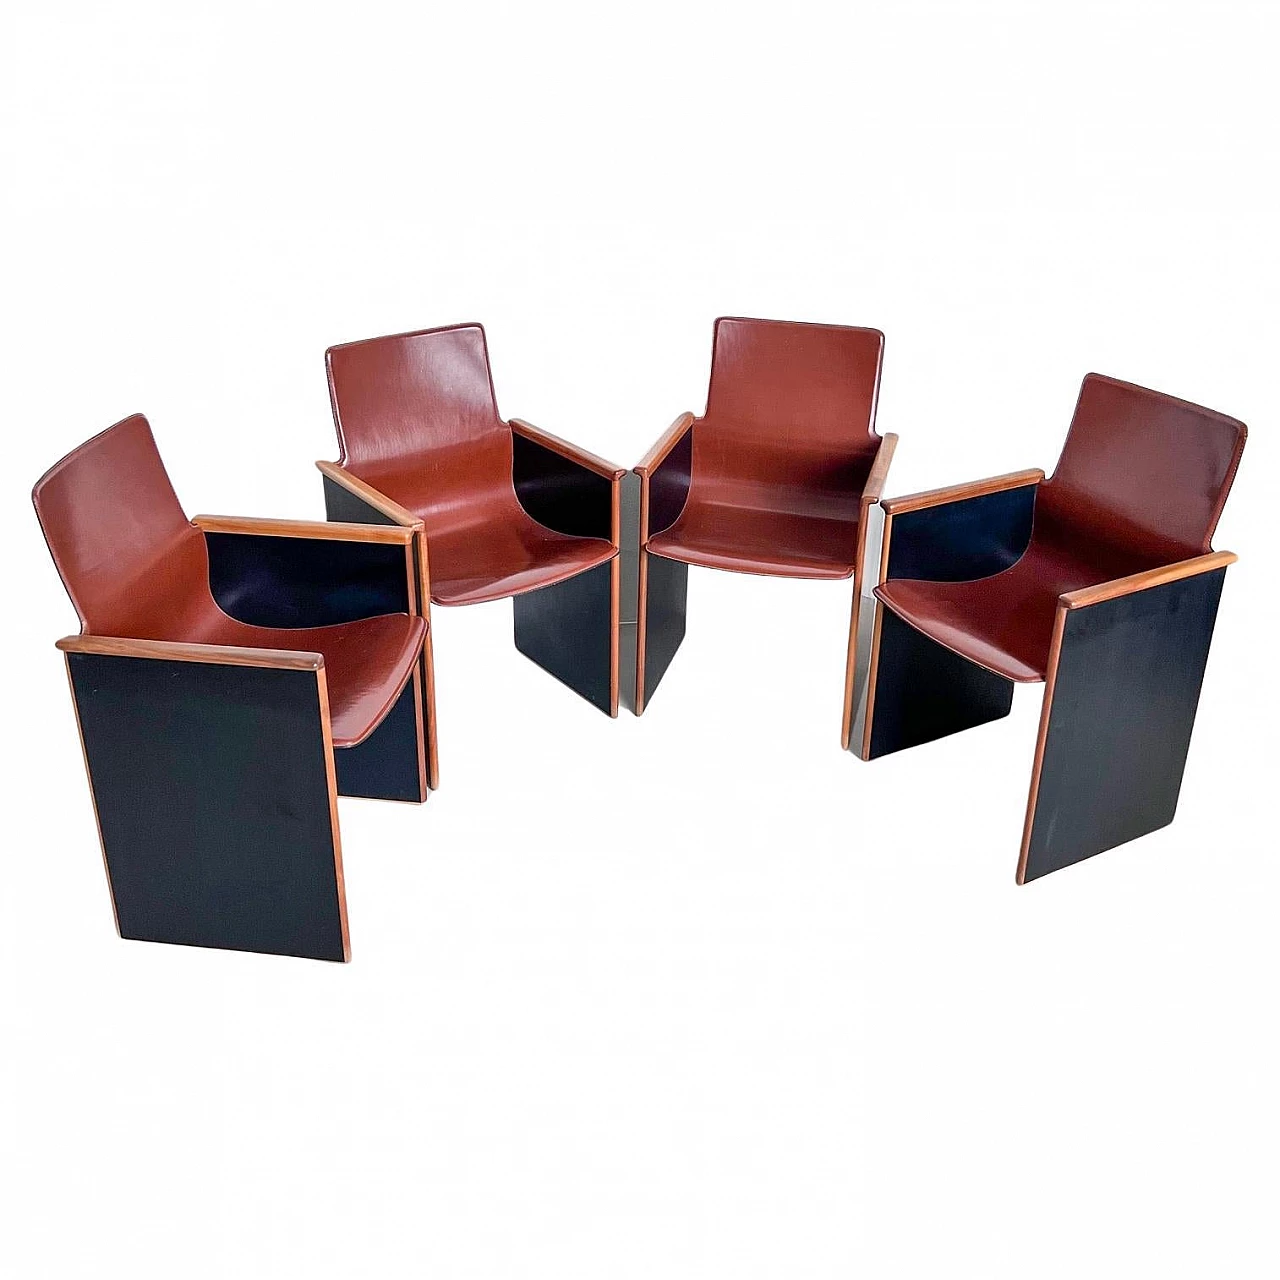 4 Segesta armchairs by Afra and Tobia Scarpa for Stildomus, 1970s 1